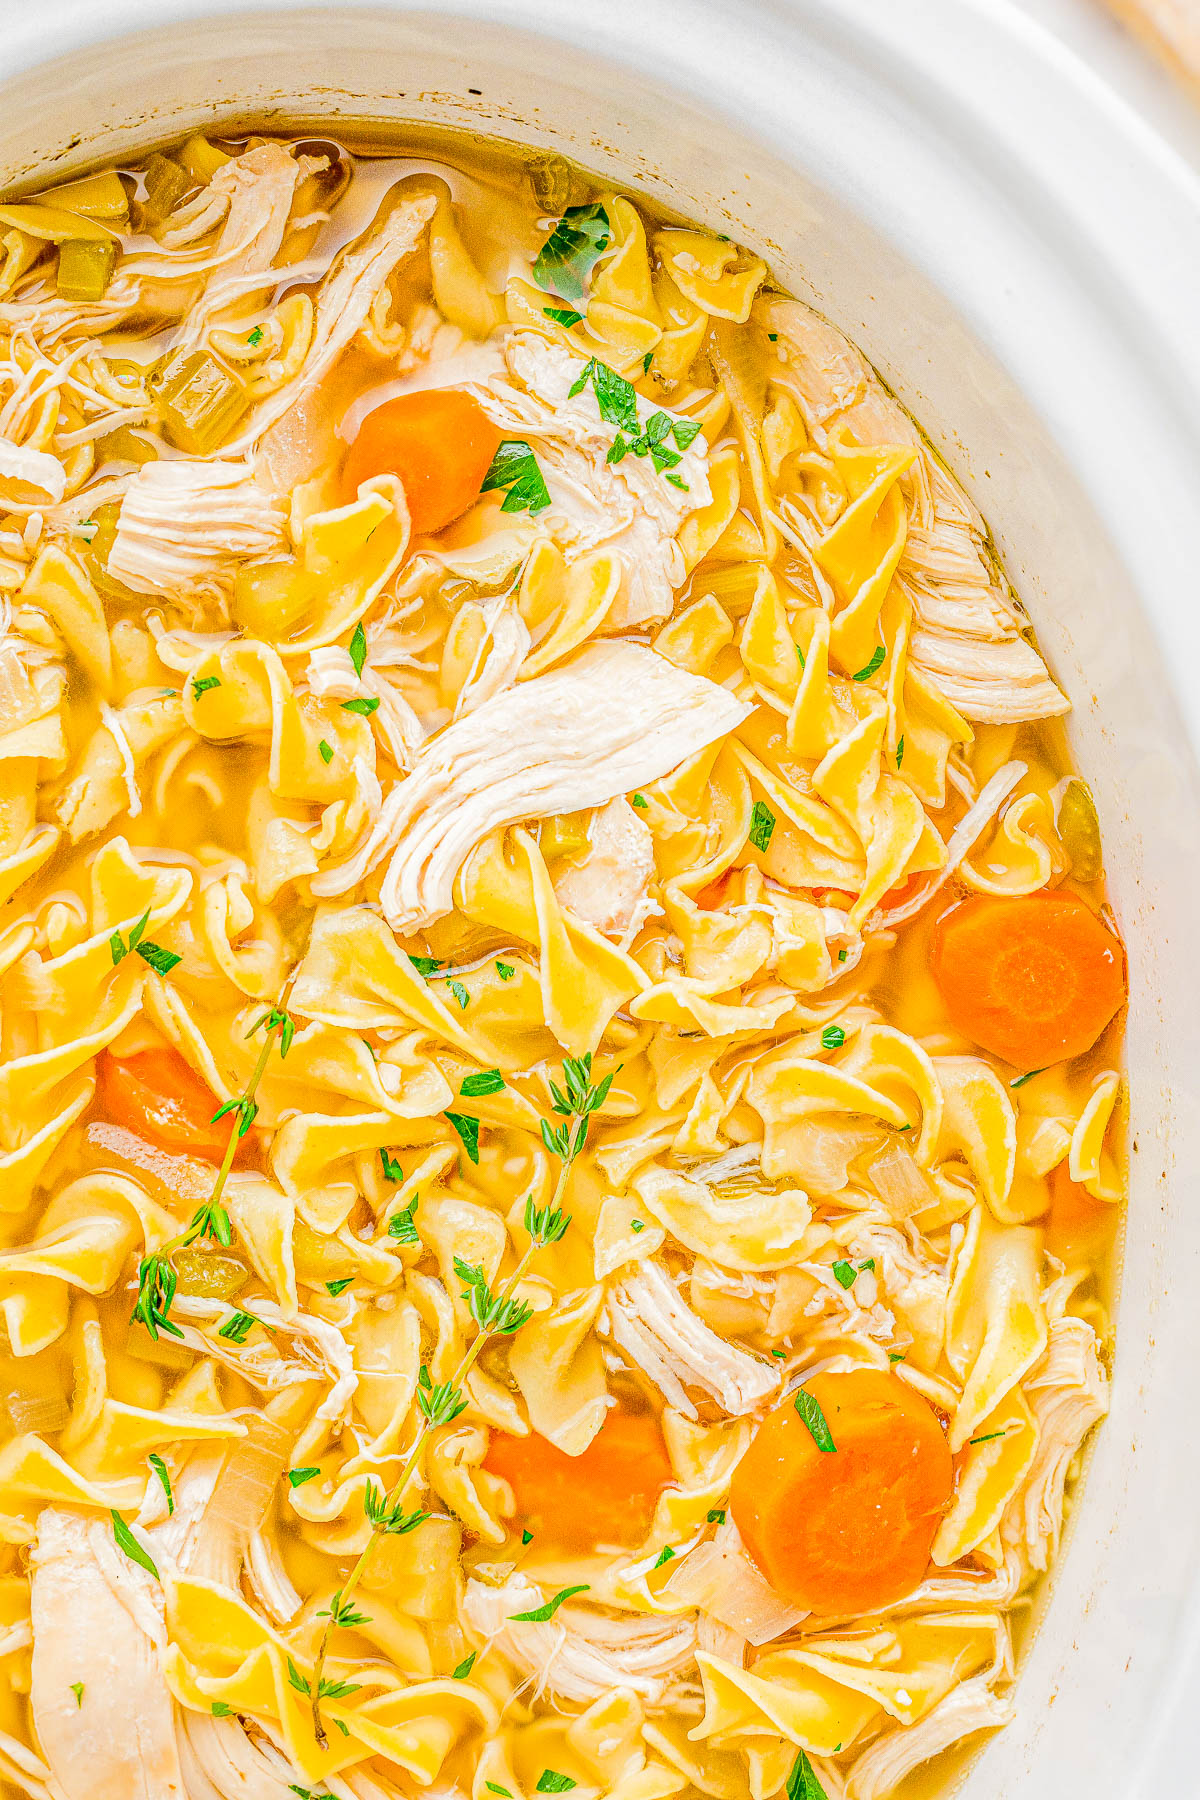 Slow Cooker Chicken Noodle Soup - Classic and comforting chicken noodle soup with loads of juicy chicken, tender noodles, carrots, celery, and seasoned to perfection so that it tastes just like grandma used to make it! But this recipe is made with EASE and convenience in mind by using your Crock-Pot. Just add the ingredients, set it and forget it, and your soup will taste AMAZING!